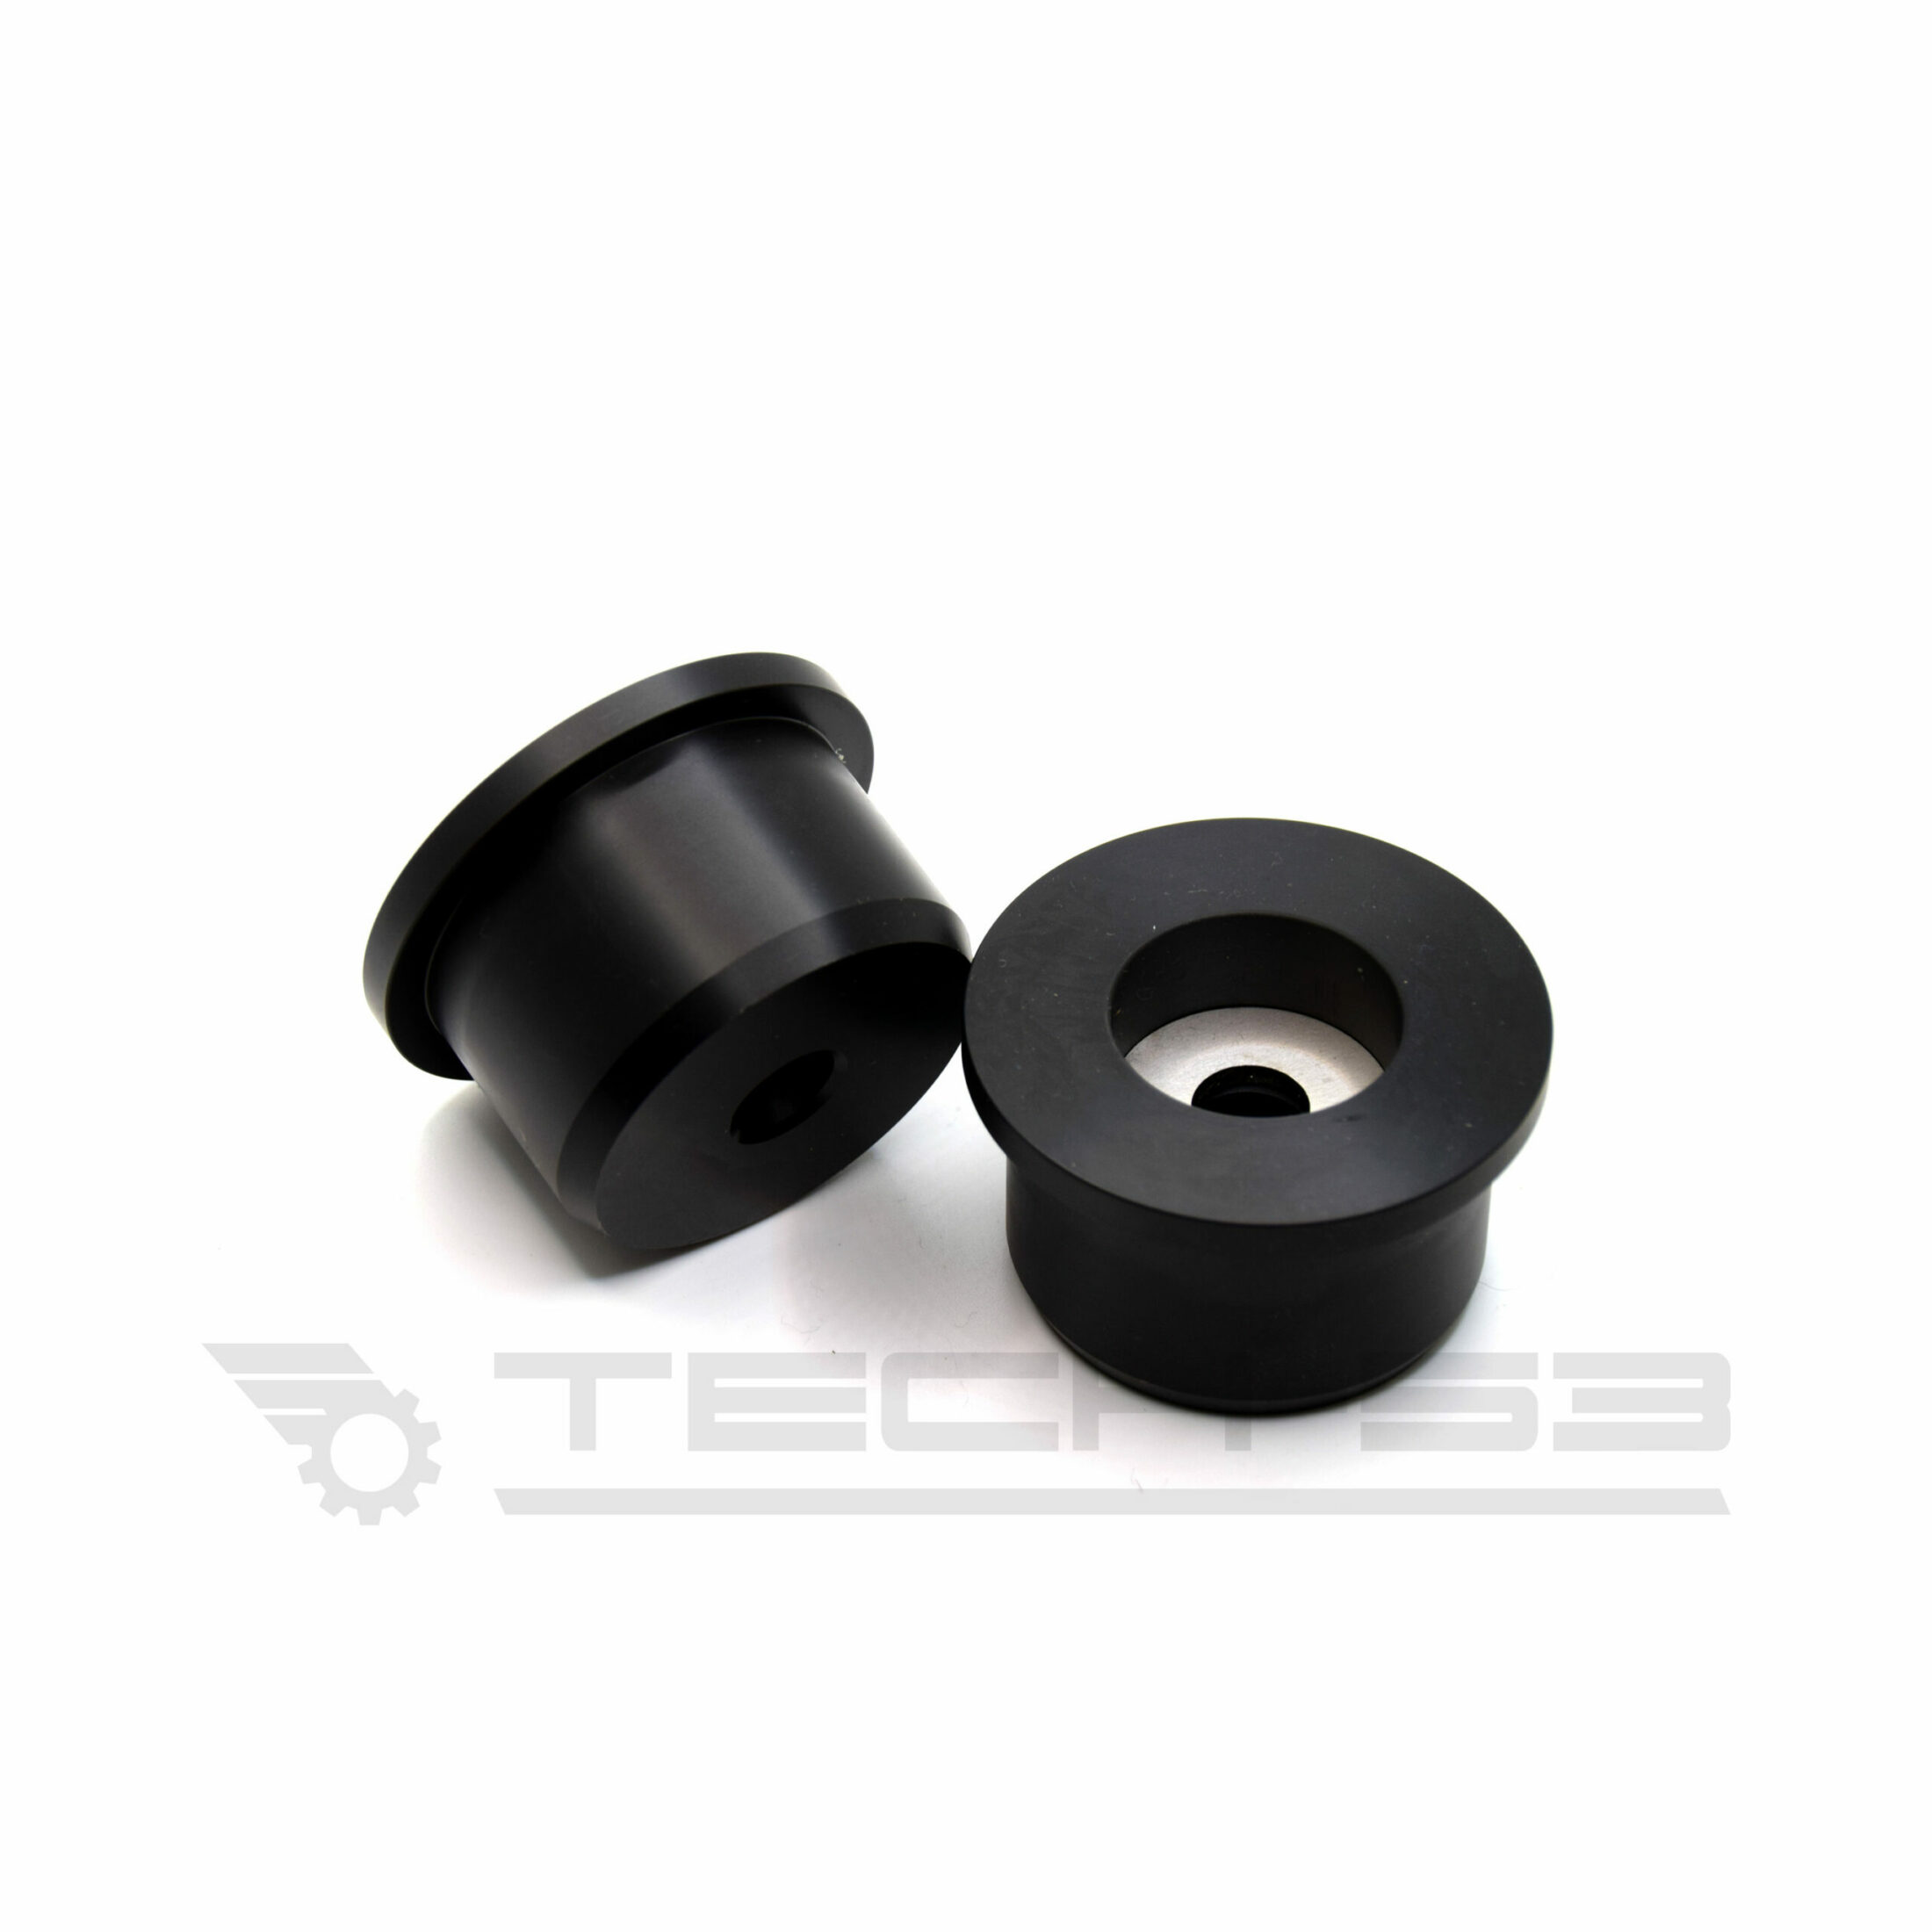 BMW E36 E46 M3 UPPER COVER DIFFERENTIAL UPGRADE SOLID BUSHING REPLACEMENT KIT